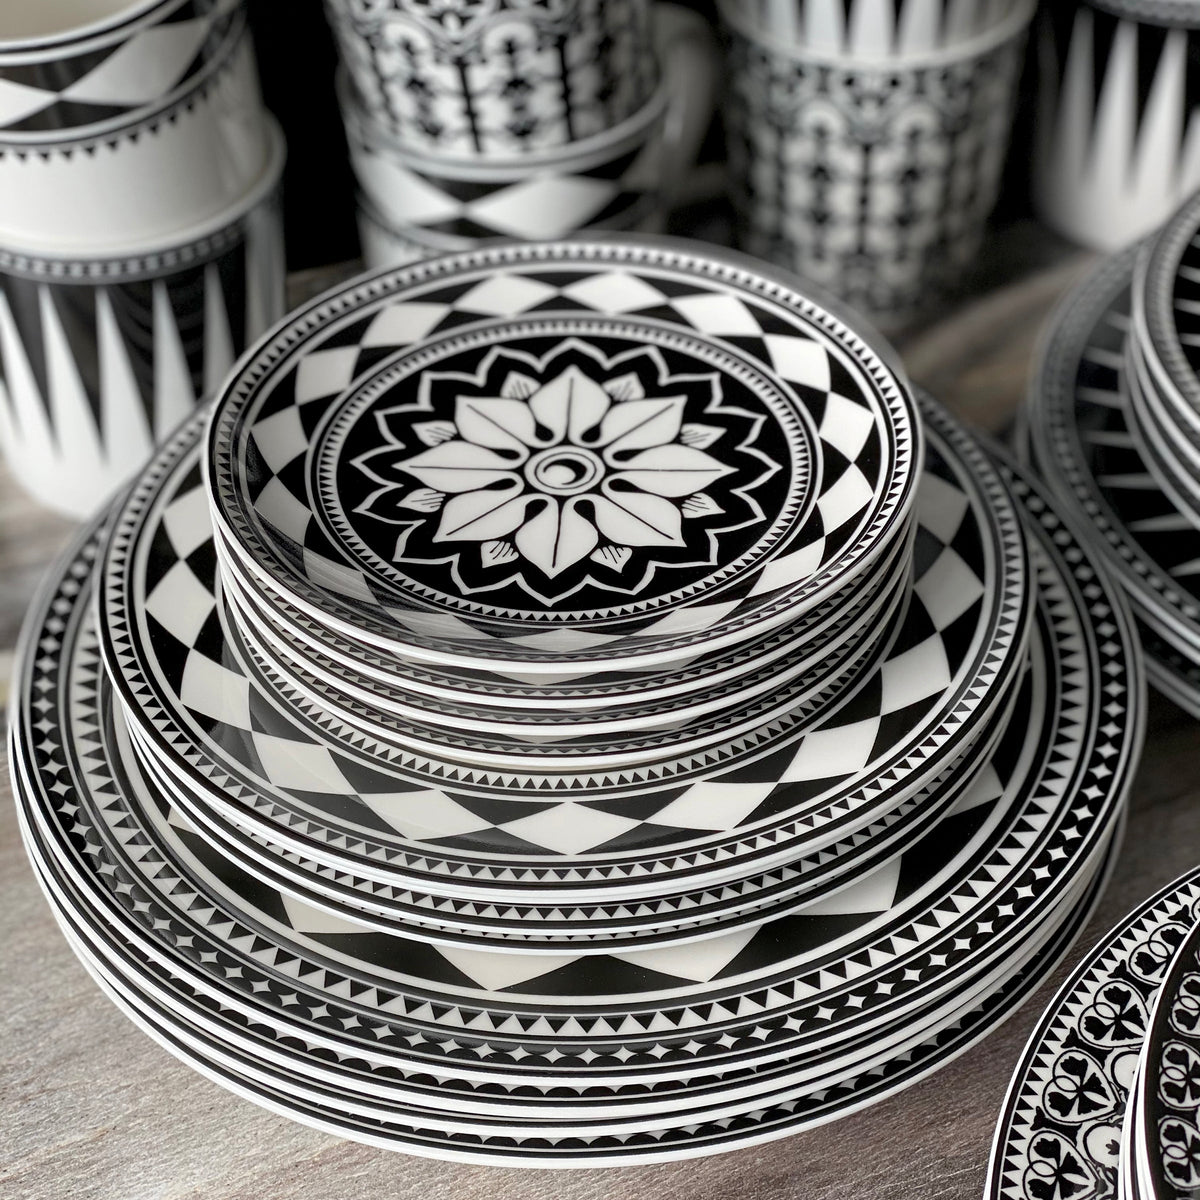 A stack of black and white patterned Fez Rimmed Dinner Plates by Caskata Artisanal Home of varying sizes, with matching bowls and cups in the background, showcases sophisticated dinnerware with a touch of Moroccan patterns.